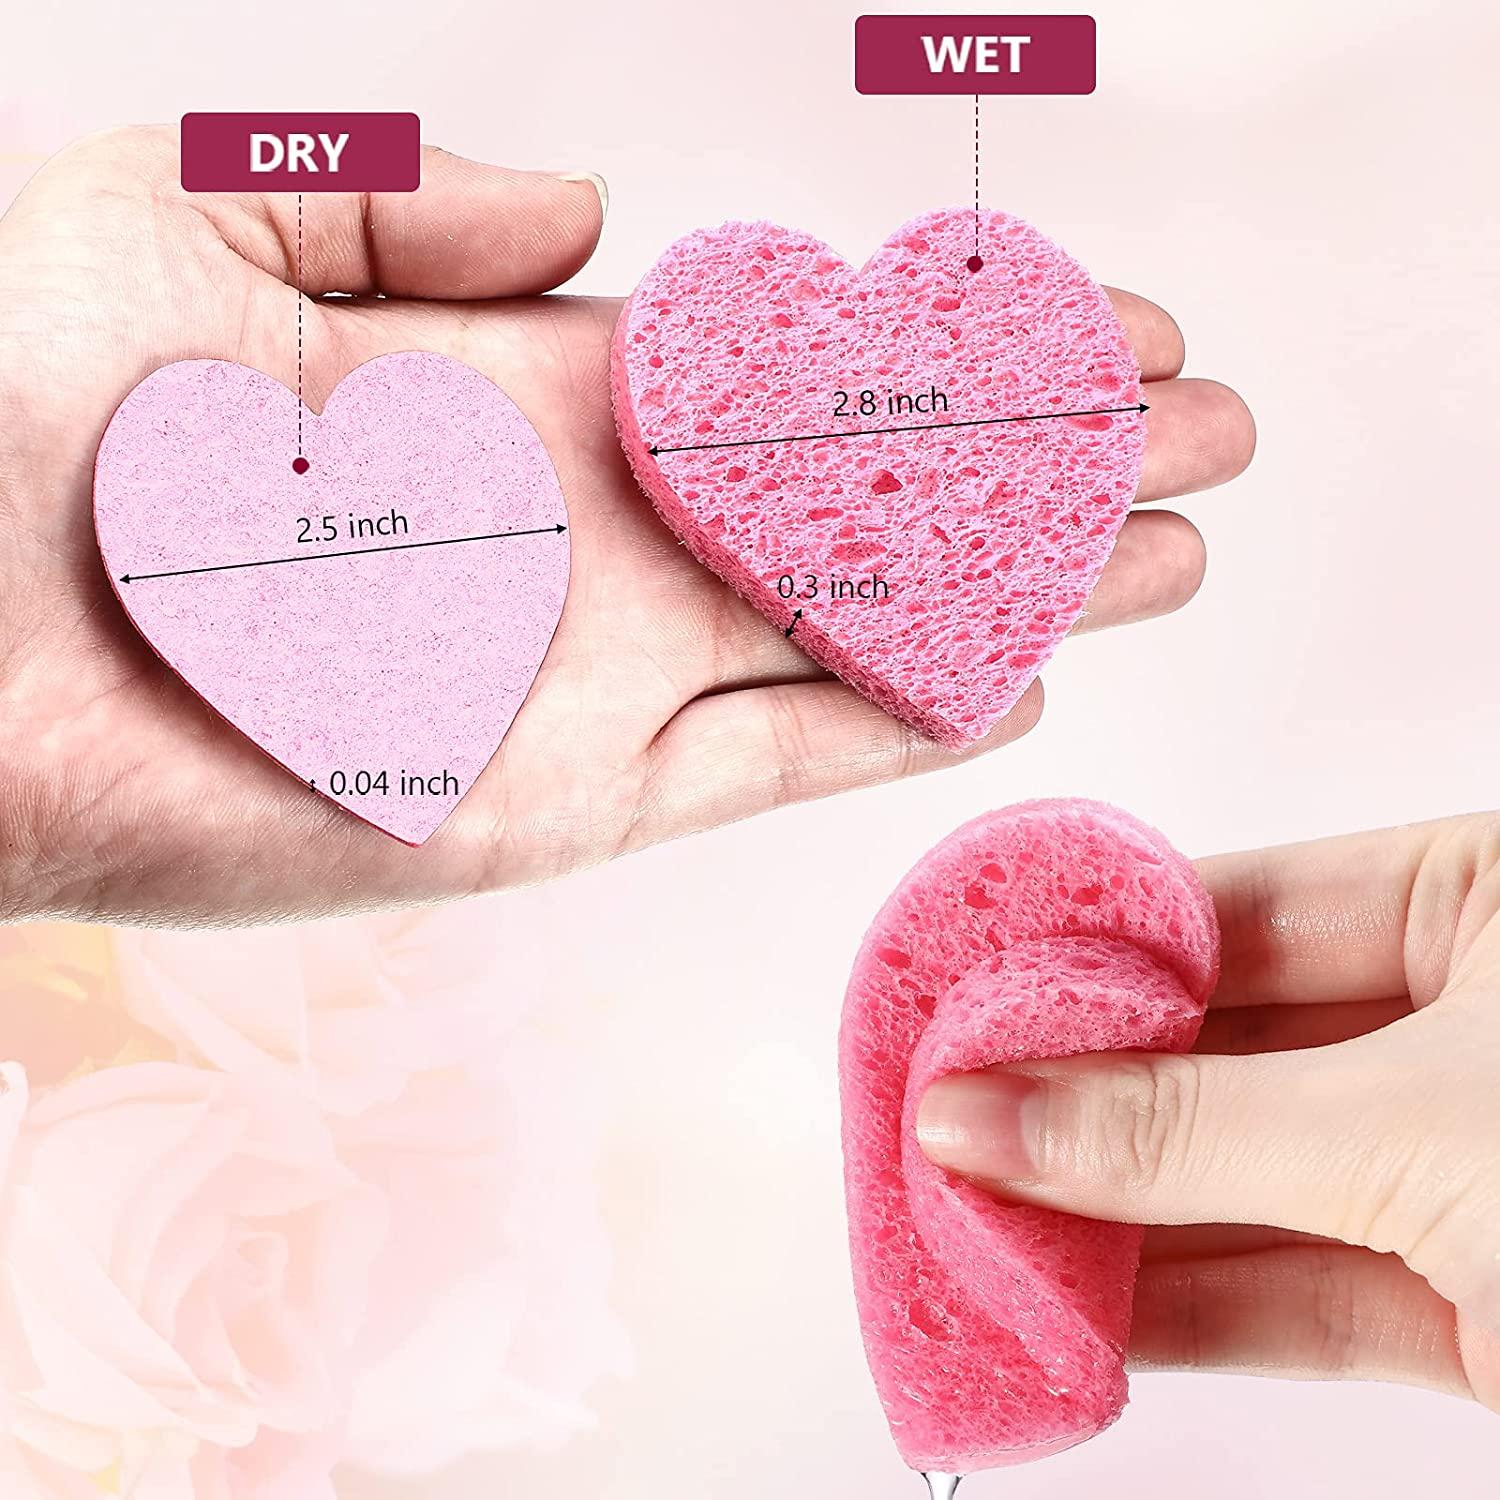 60 Pieces Facial Sponges with Container, Heart Shape Compressed Face Sponge  Natural Sponge Pads for Washing Face Cleansing Exfoliating Esthetician  Makeup Removal (Pink)